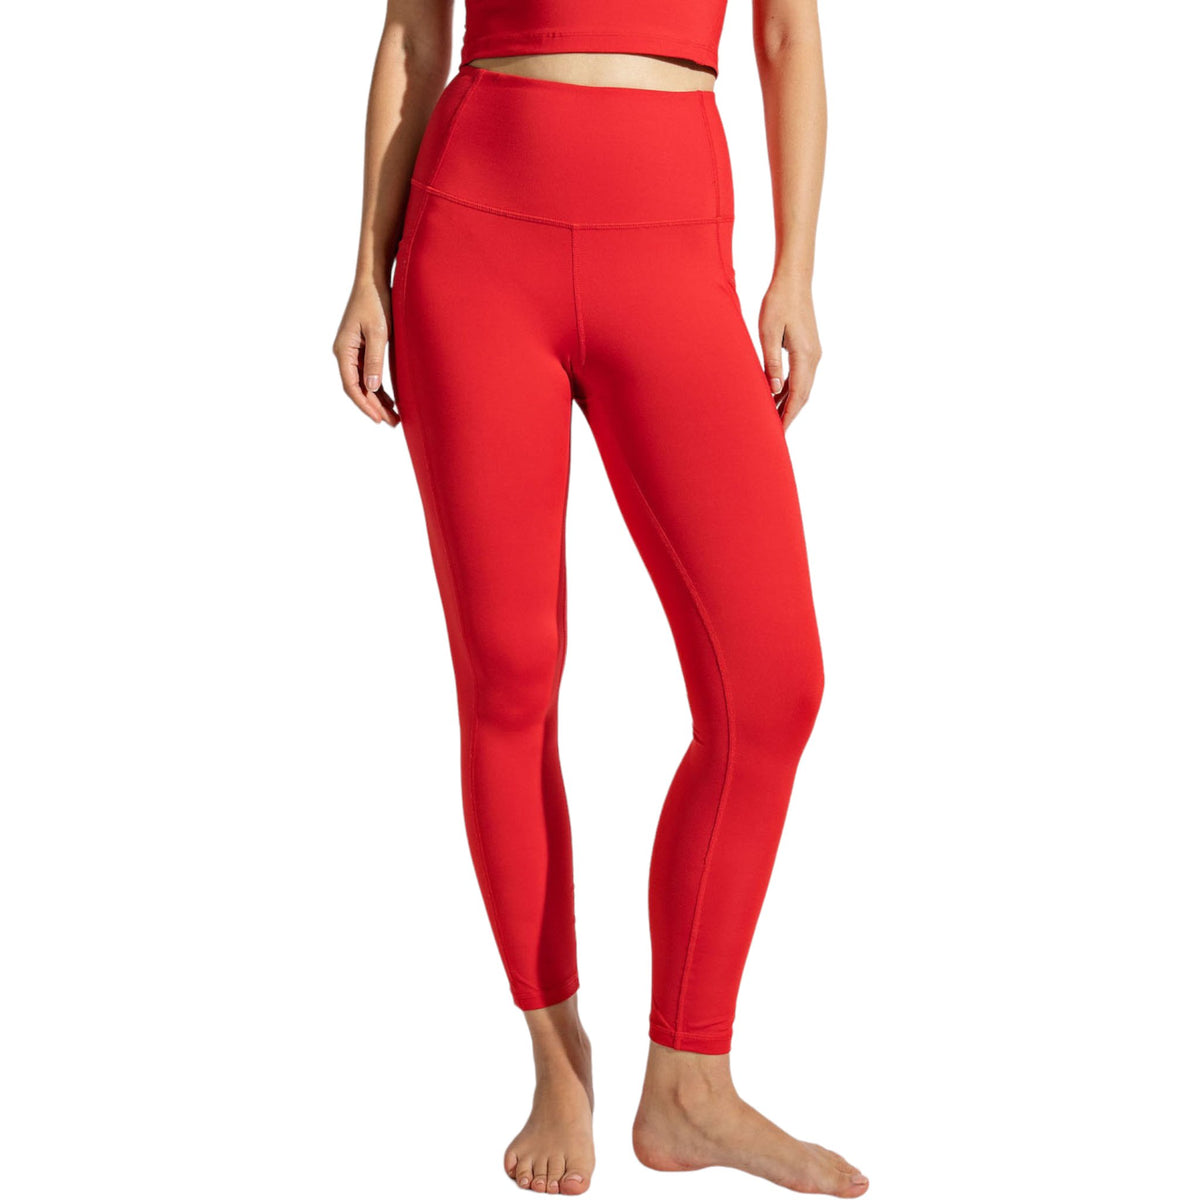 Plus Size Women's Red Compression Leggings - Fabulously Dressed Boutique 